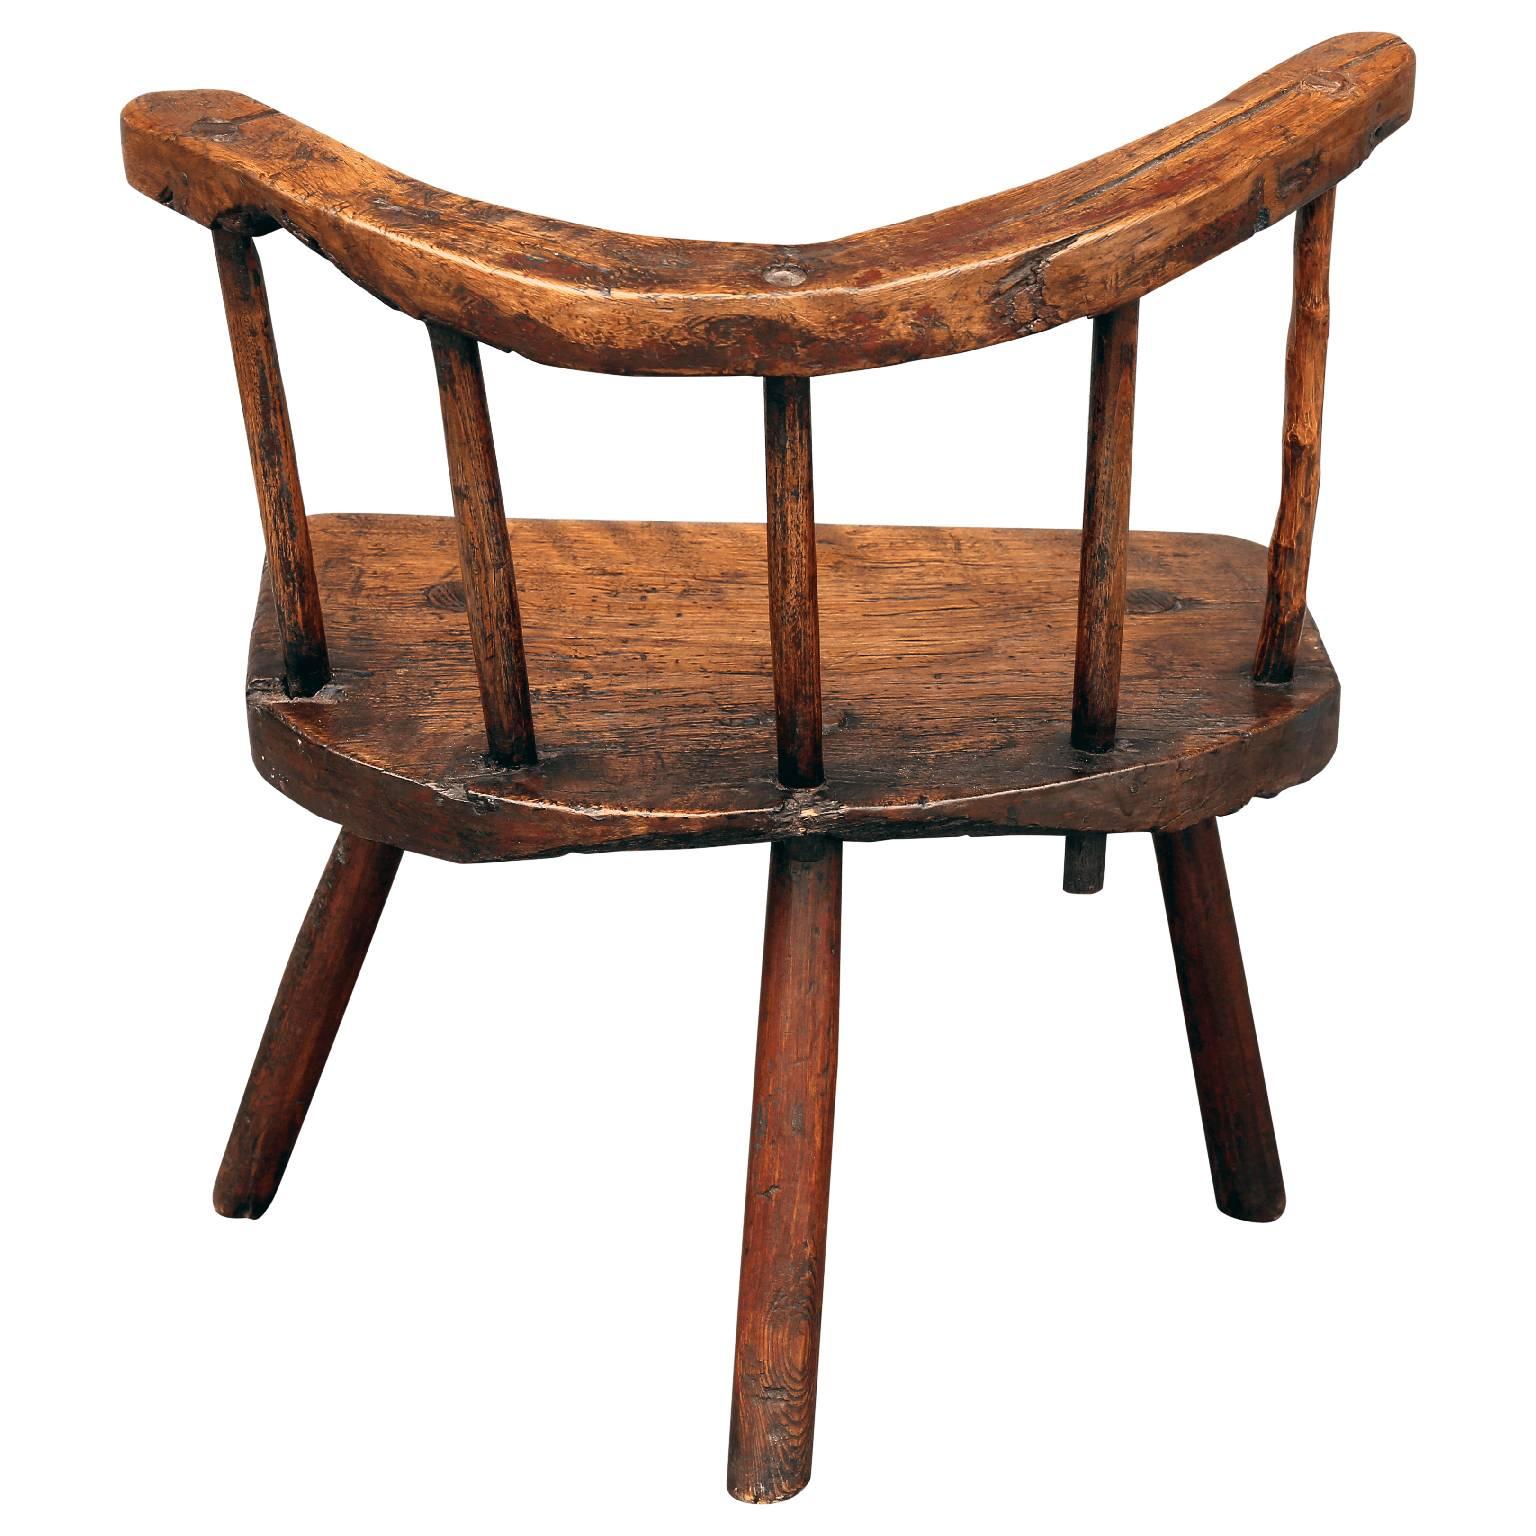 Folk Art Early 18th Century Stick Chair from Wales